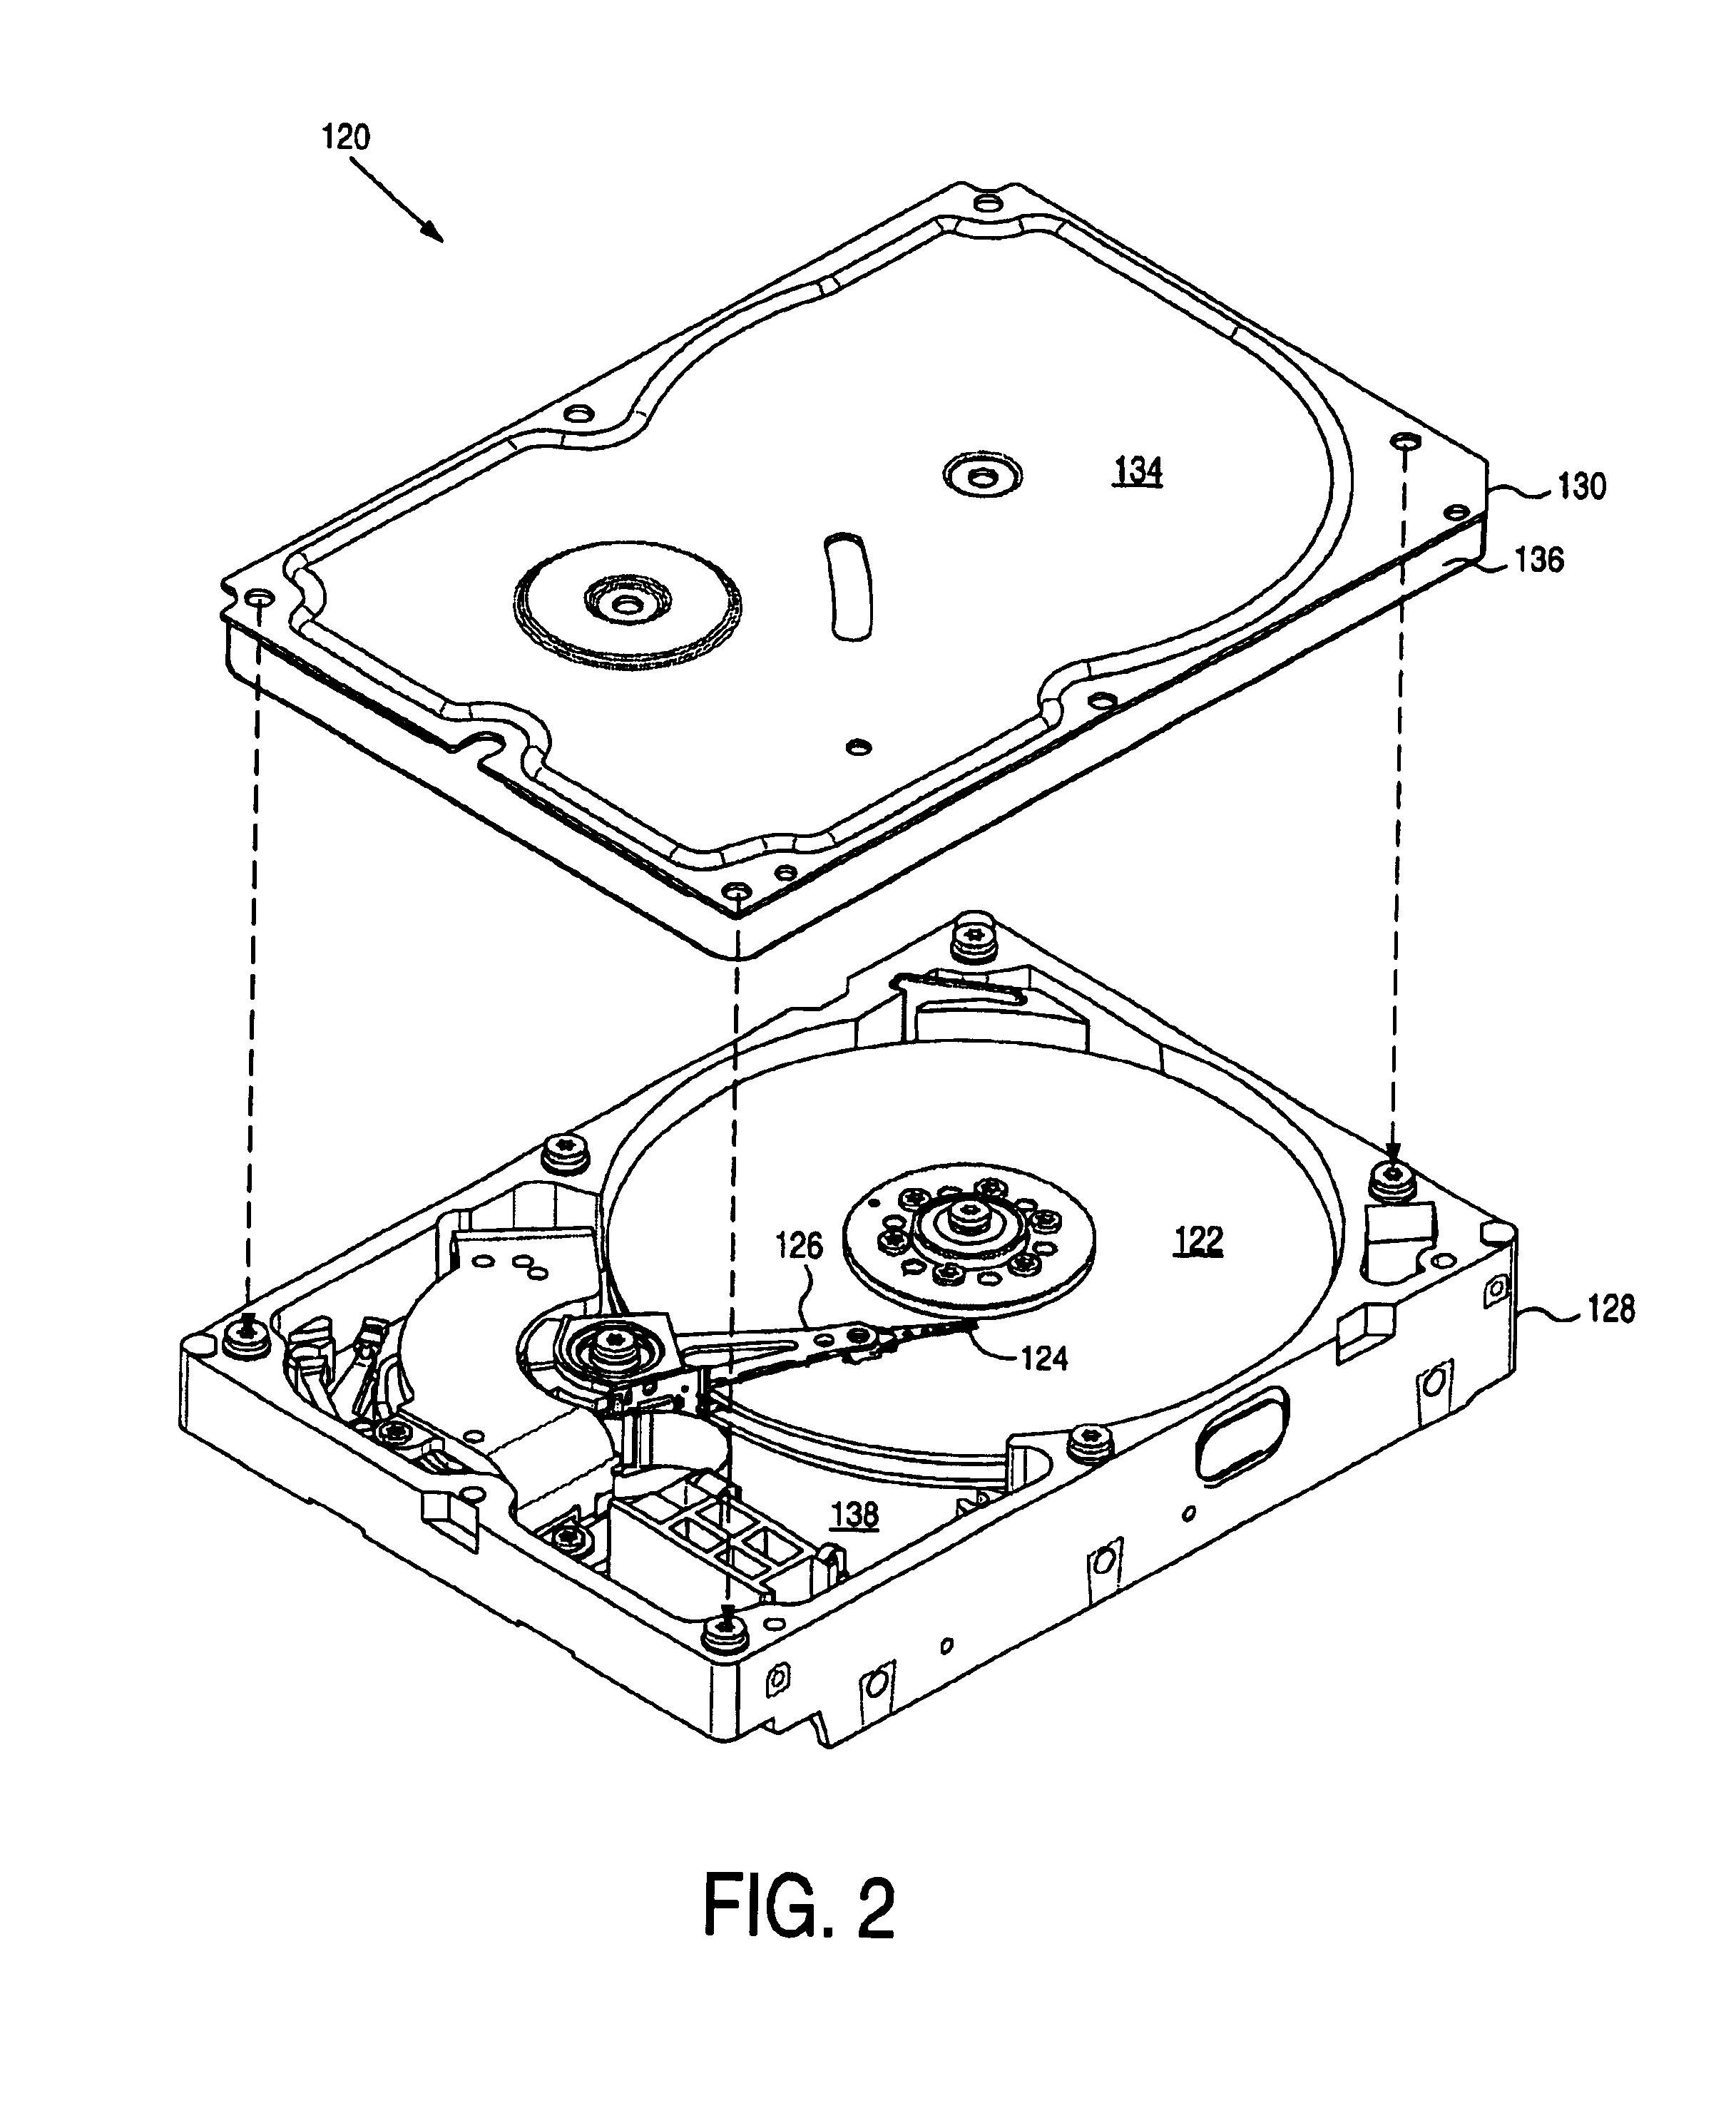 Disk drive comprising a cover shaped to improve radial and axial shrouding